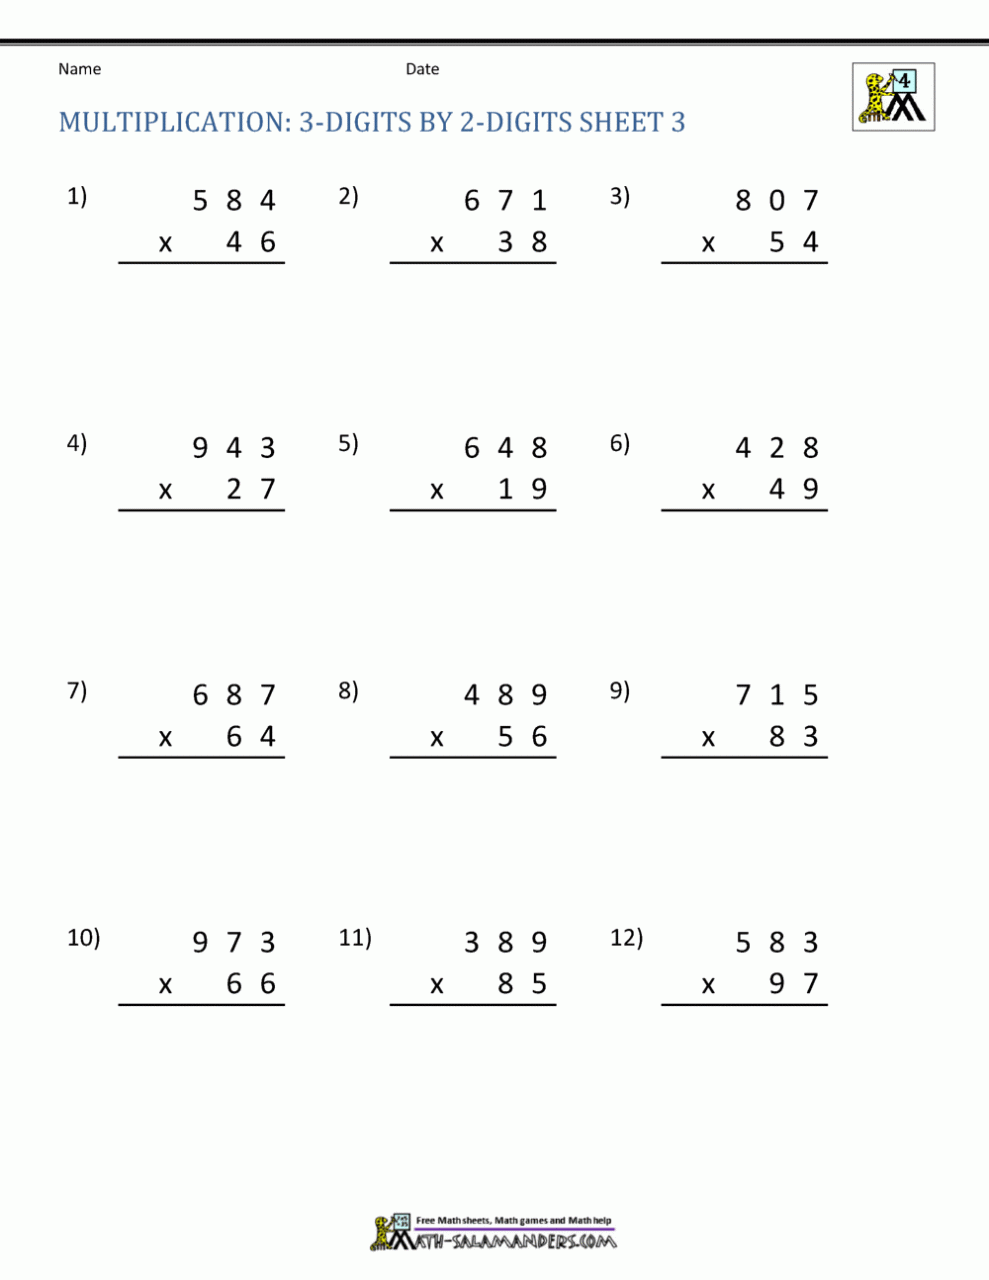 practice math worksheets multiplication 3 digits by 2 digits 3 Images